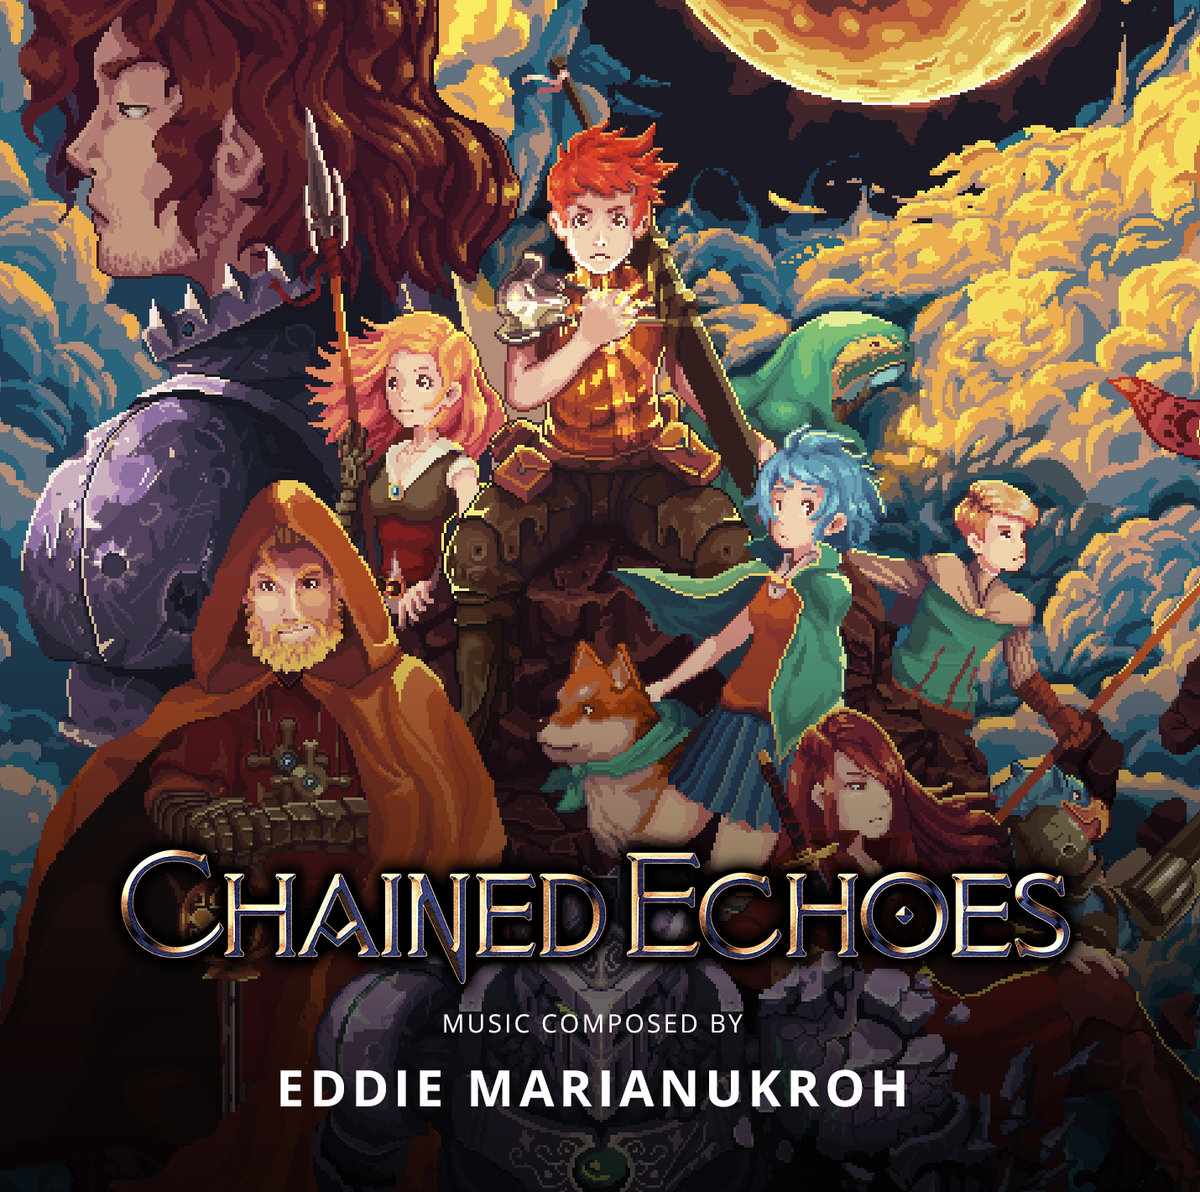 chained echoes steam download free